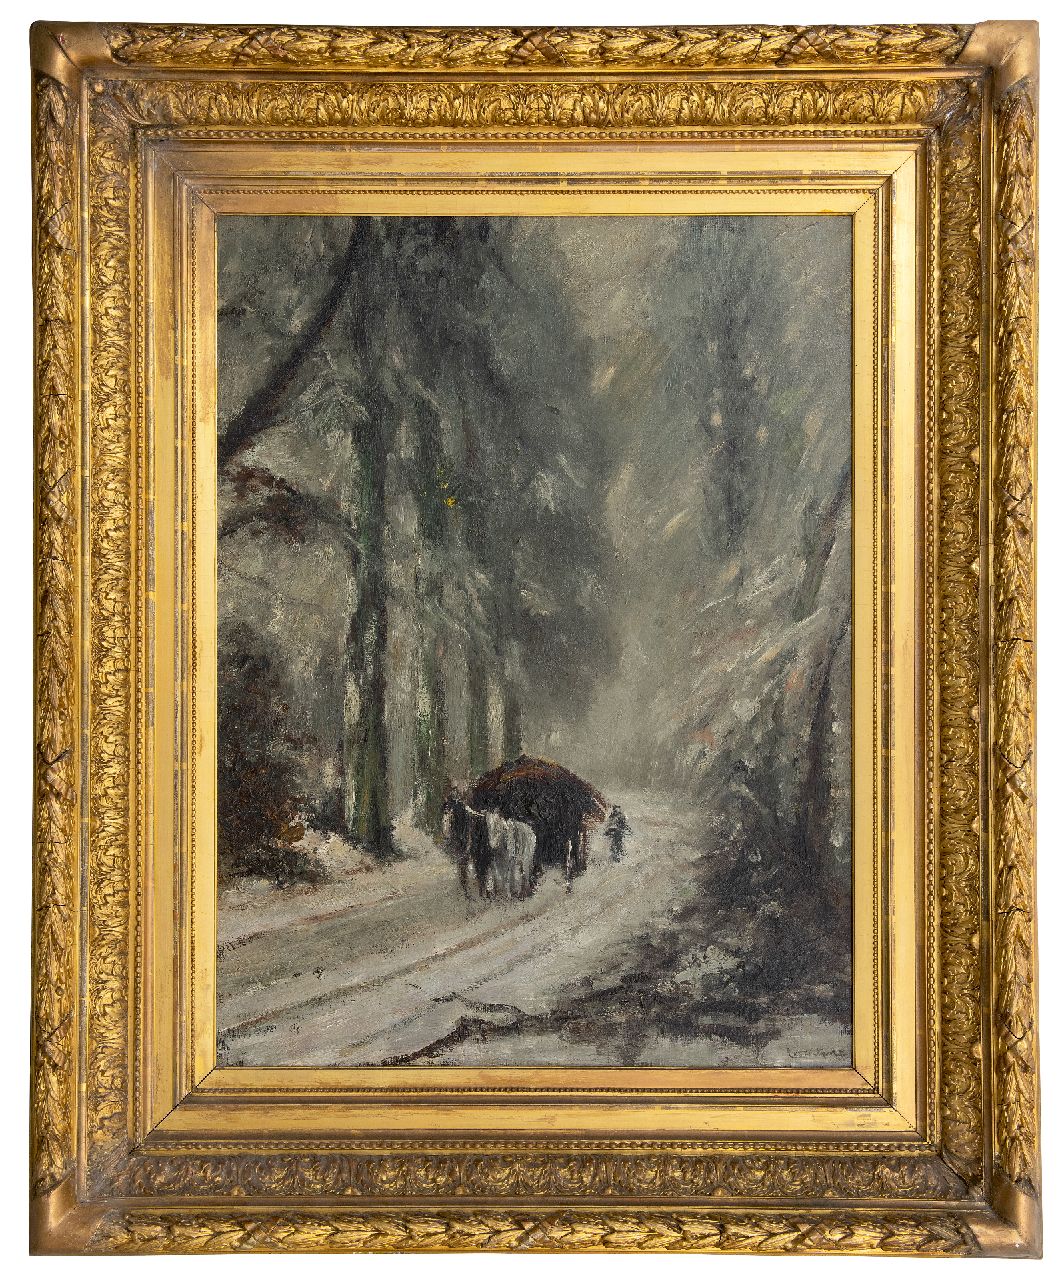 Apol L.F.H.  | Lodewijk Franciscus Hendrik 'Louis' Apol | Paintings offered for sale | After snowfall: horse and cart on snowy forest path, oil on canvas 81.0 x 61.0 cm, signed l.l.